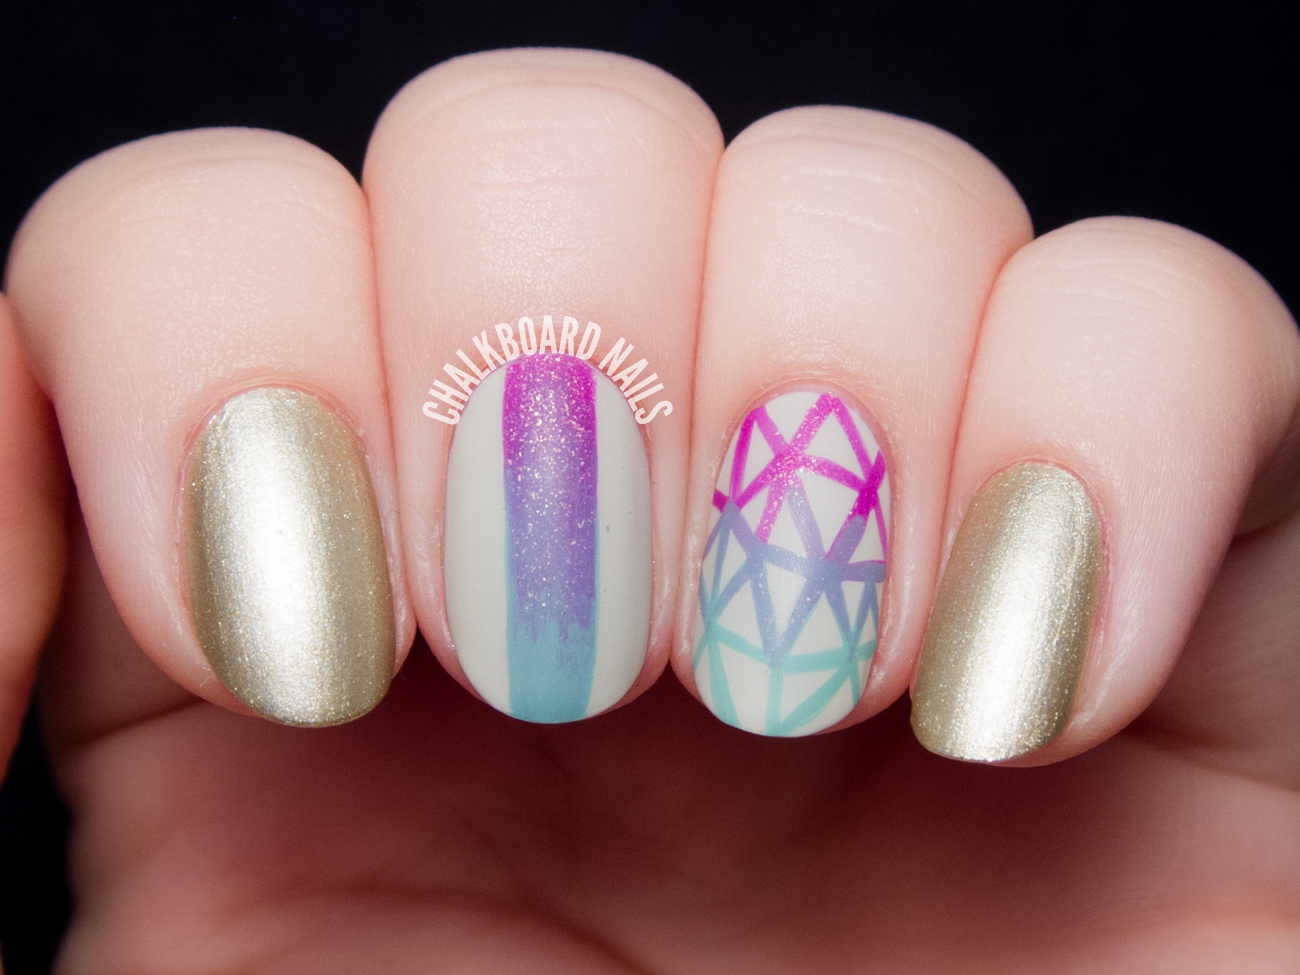 Gradient Sky Nail Art Techniques for Beginners - wide 5